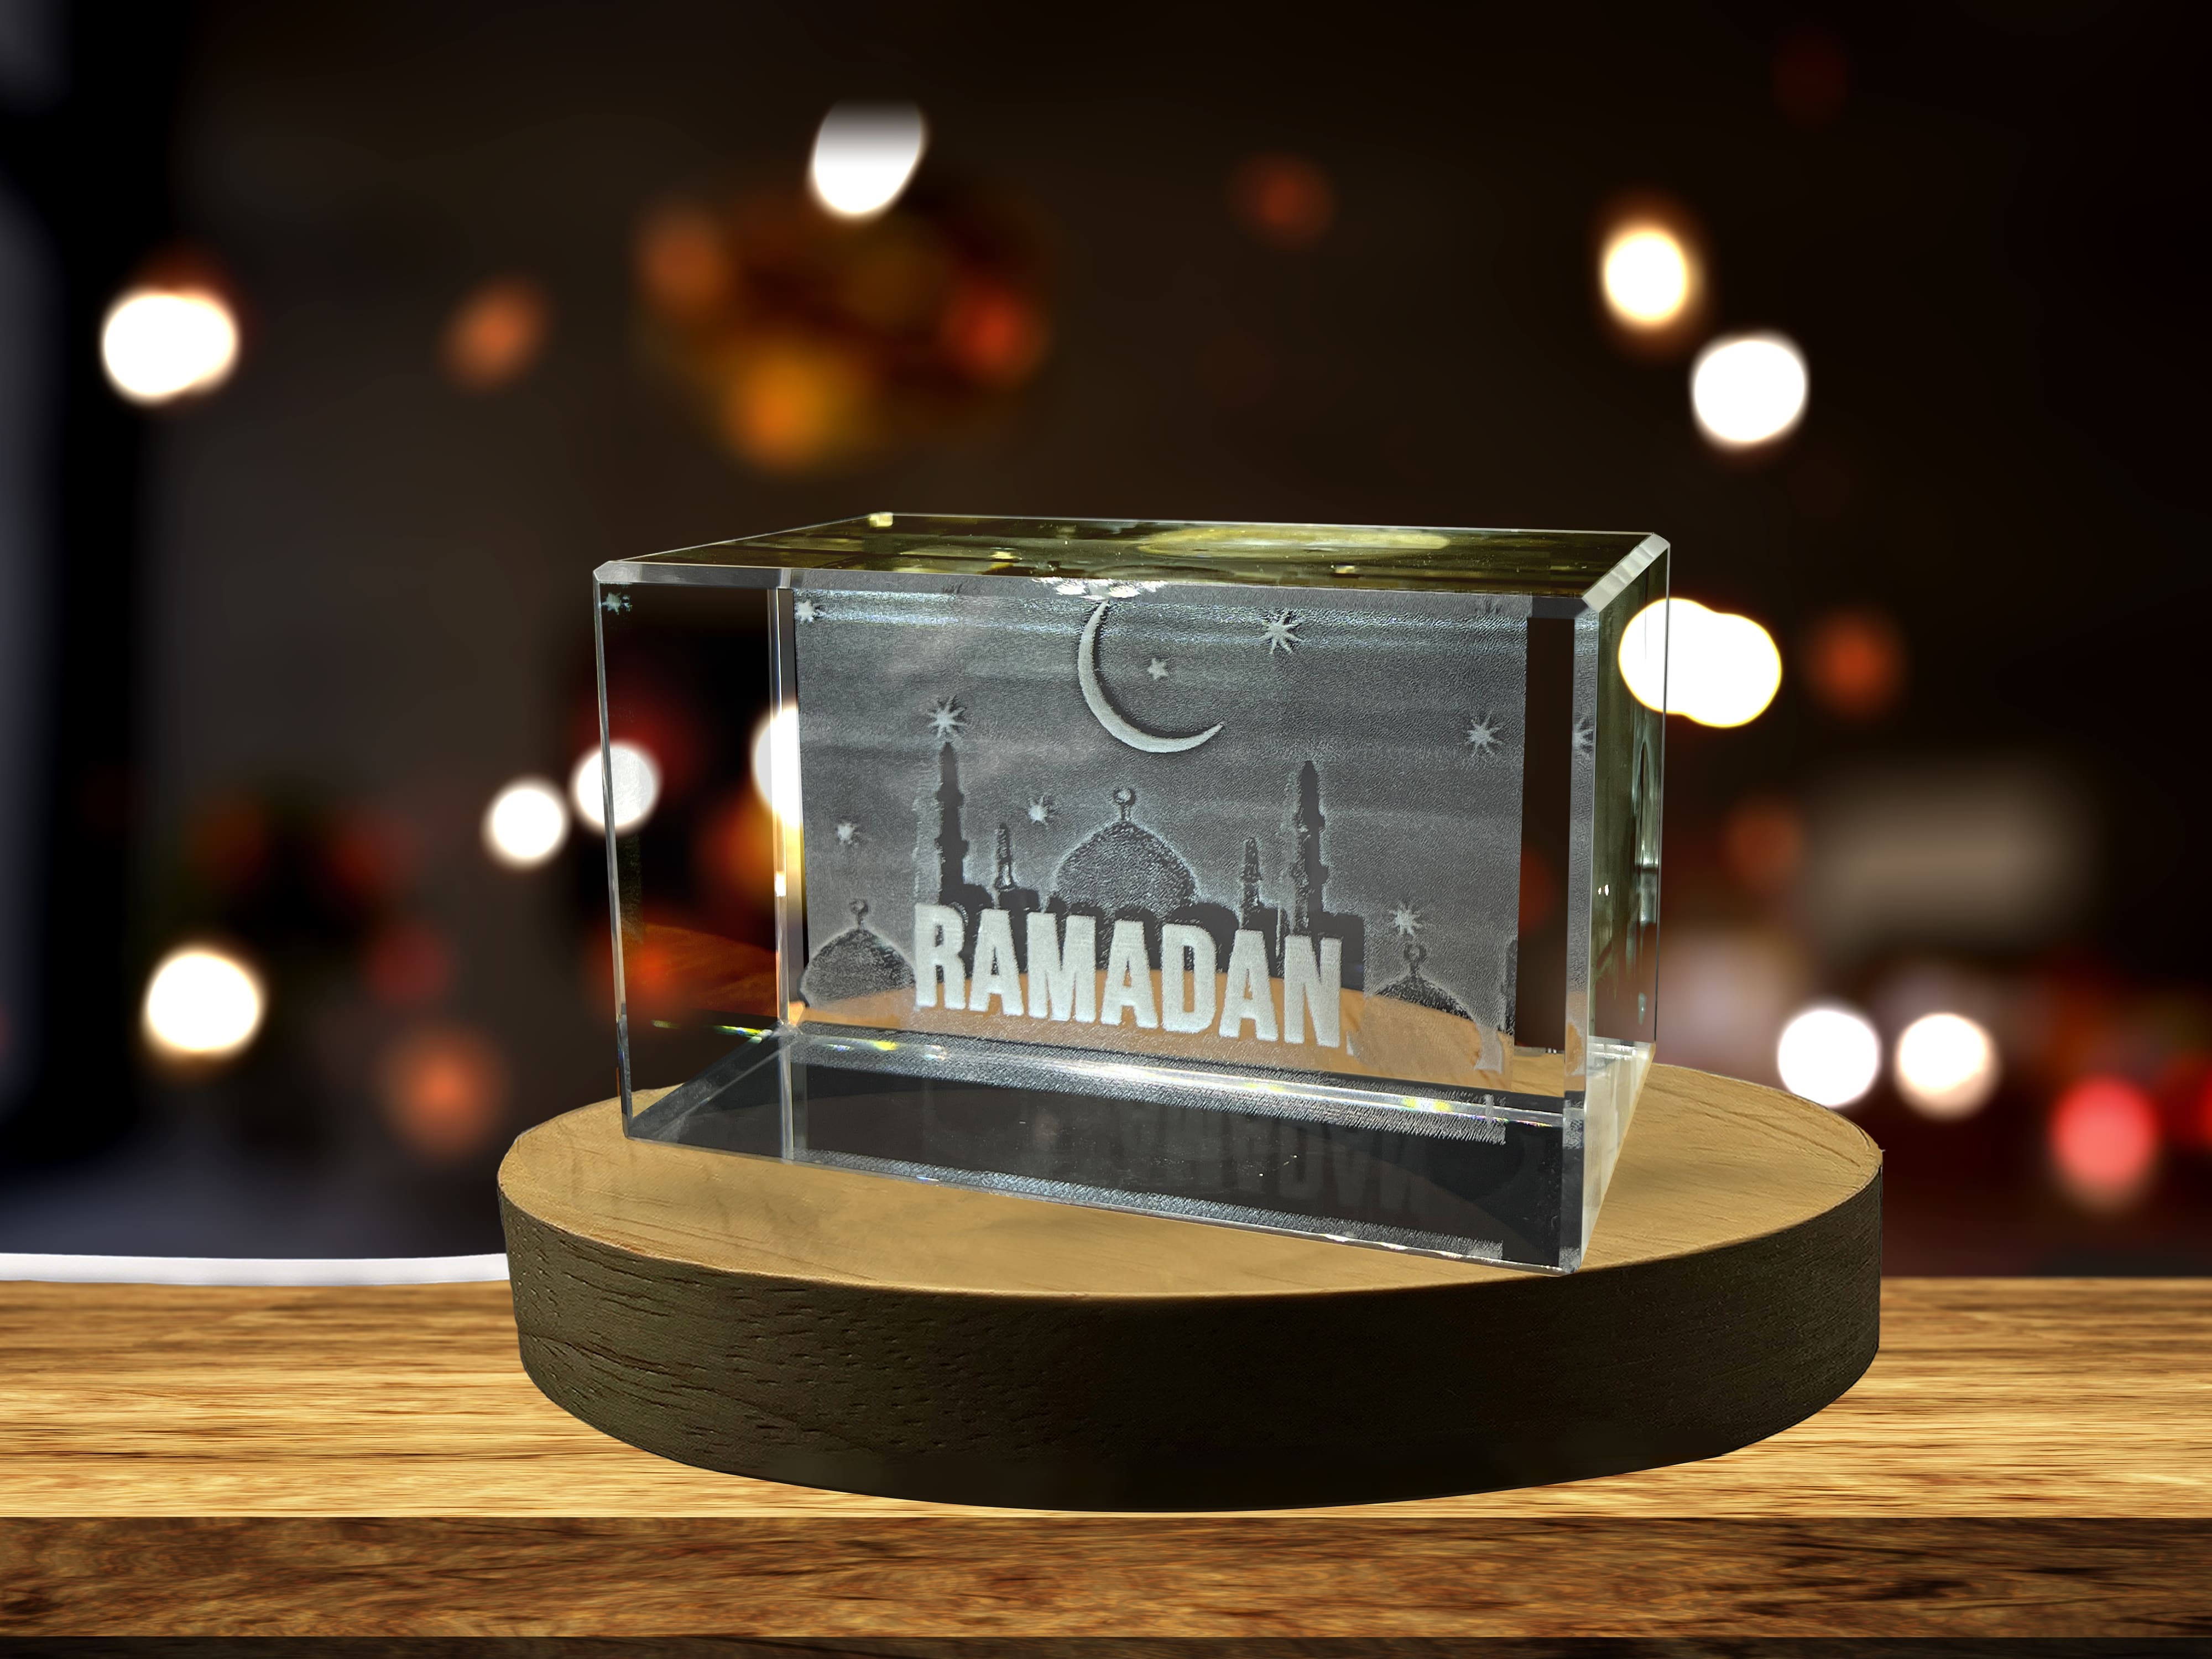 Ramadan 3D Engraved Crystal Keepsake - Personalized Gift & Home Decor A&B Crystal Collection